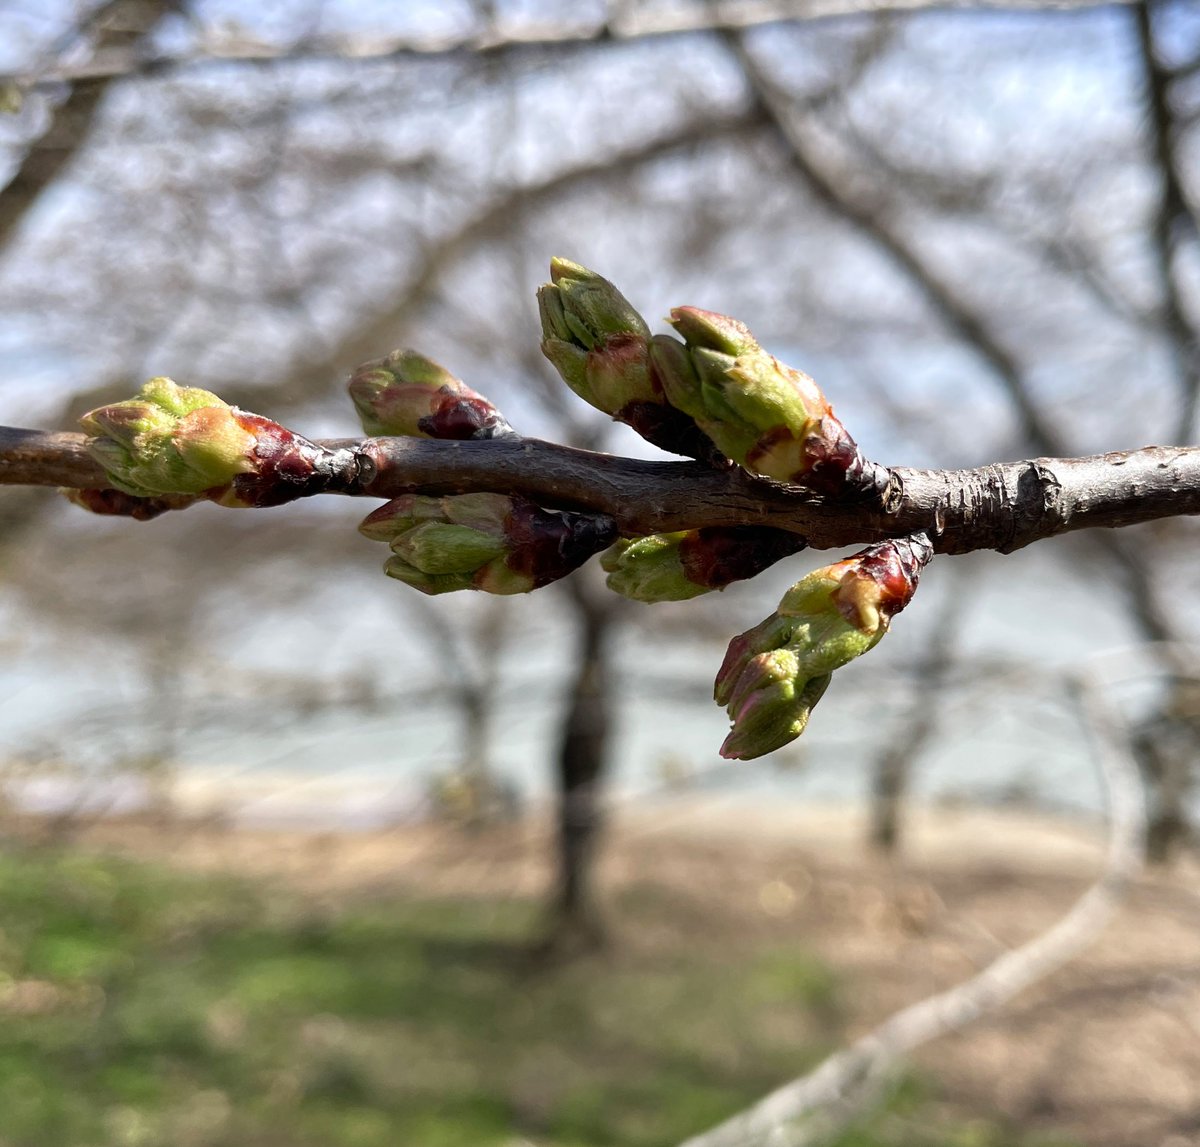 Oh, we're halfway there! The cherry blossoms have reached florets extended, the 3rd of 6 stages. 🌸🌸🌸/🌸🌸🌸 Follow the path to peak bloom online: nps.gov/cherry #Cherryblossom #BloomWatch